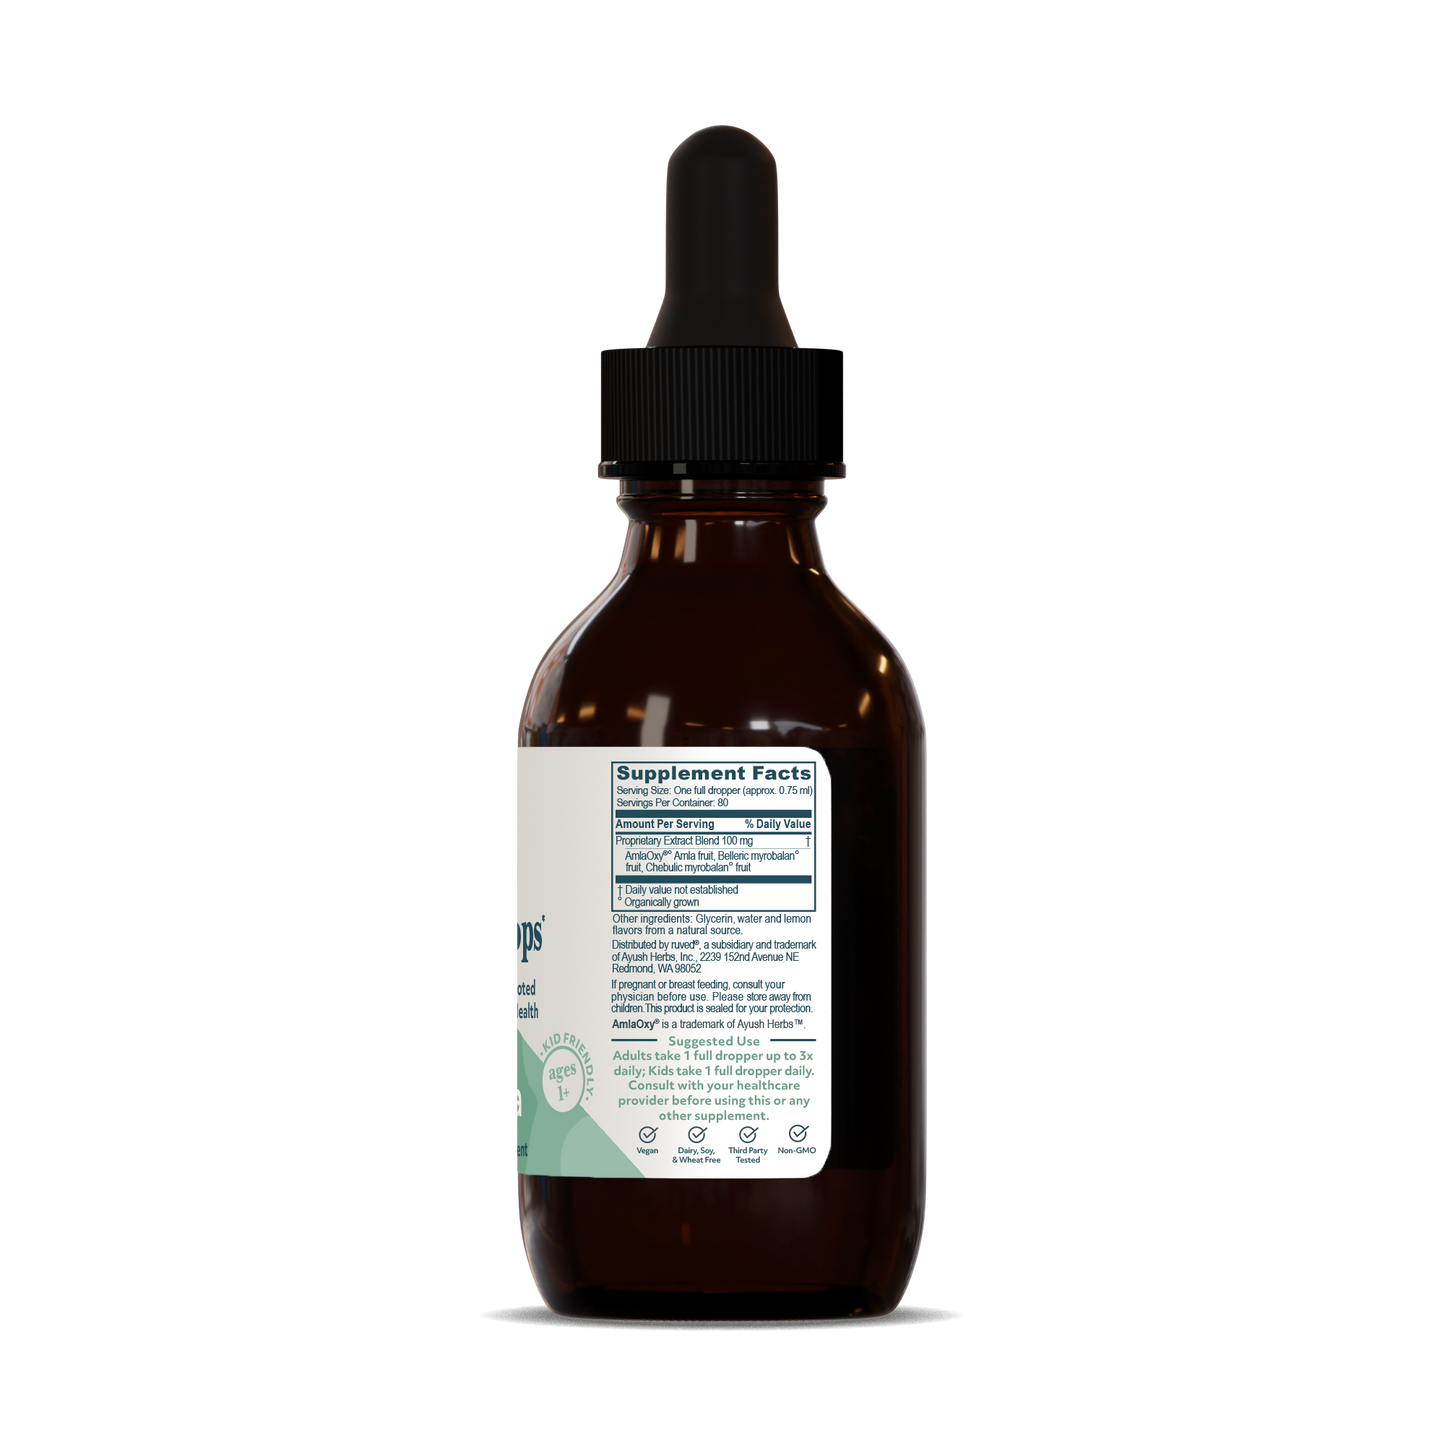 Triphala Drops Supplement Facts Side - Ayurvedic Digestive Support, 60ml Bottle, Herbal Blend for Gut Health and Digestion Detoxification.